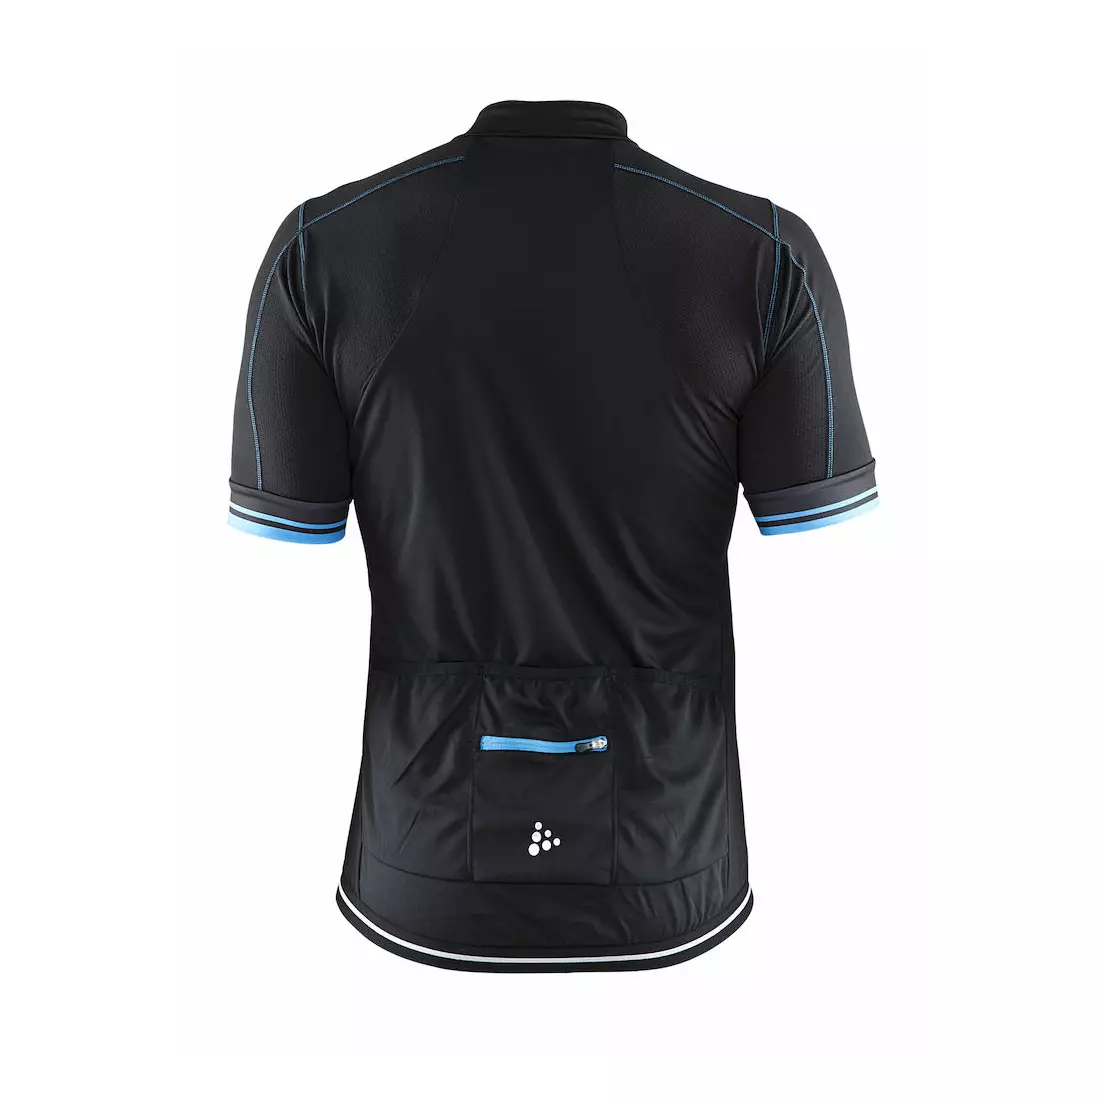 CRAFT PUNCHEUR cycling jersey 1903294-9317